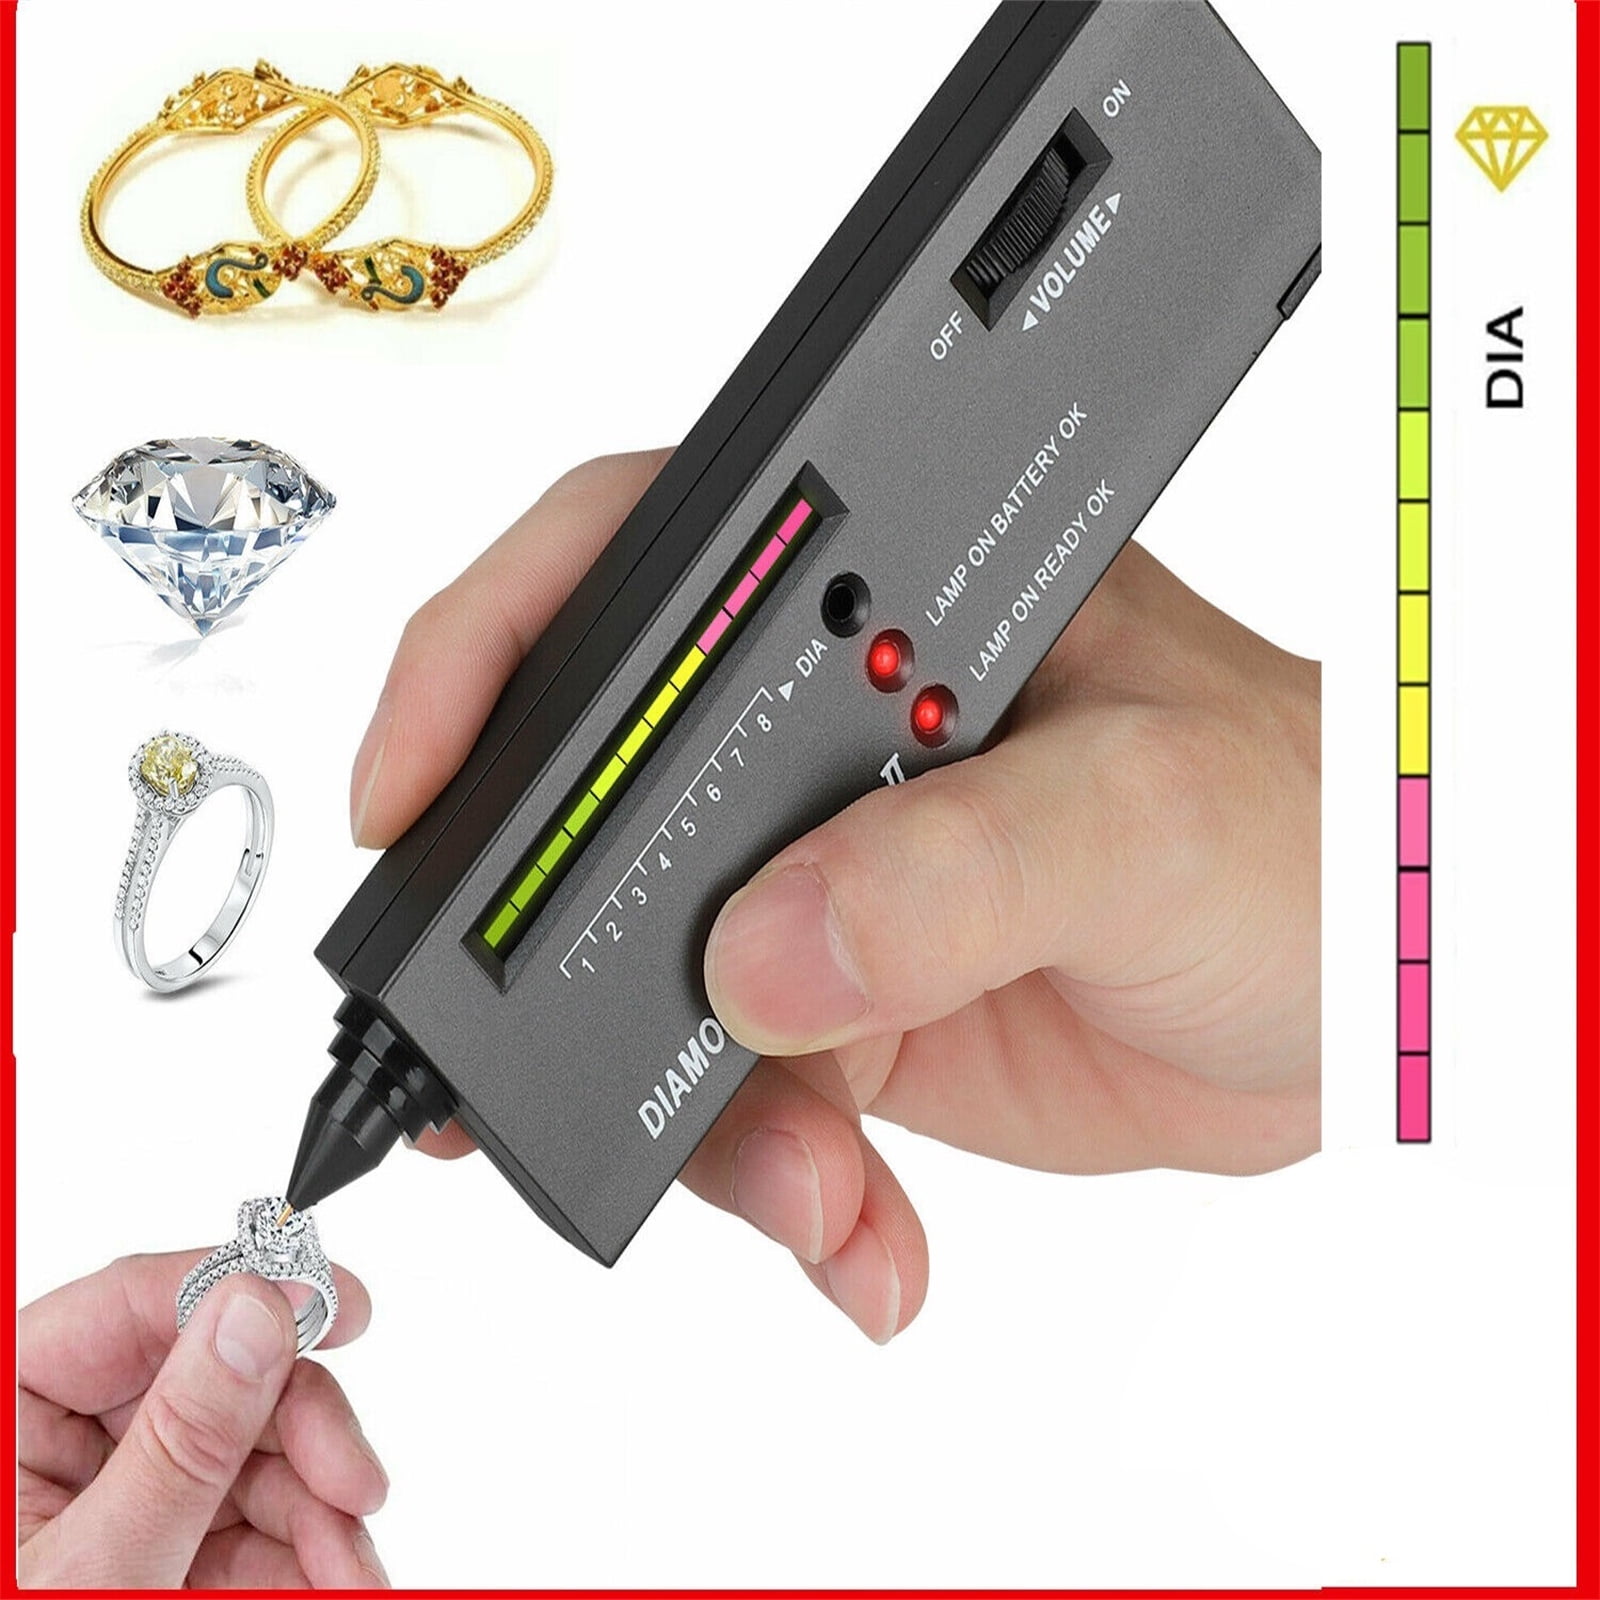 Ronshin Portable Diamond Tester Selector Illuminated Jewelry Gemstone Testing Tool Kit Portable Electronic Equipment, Women's, Size: Battery Included